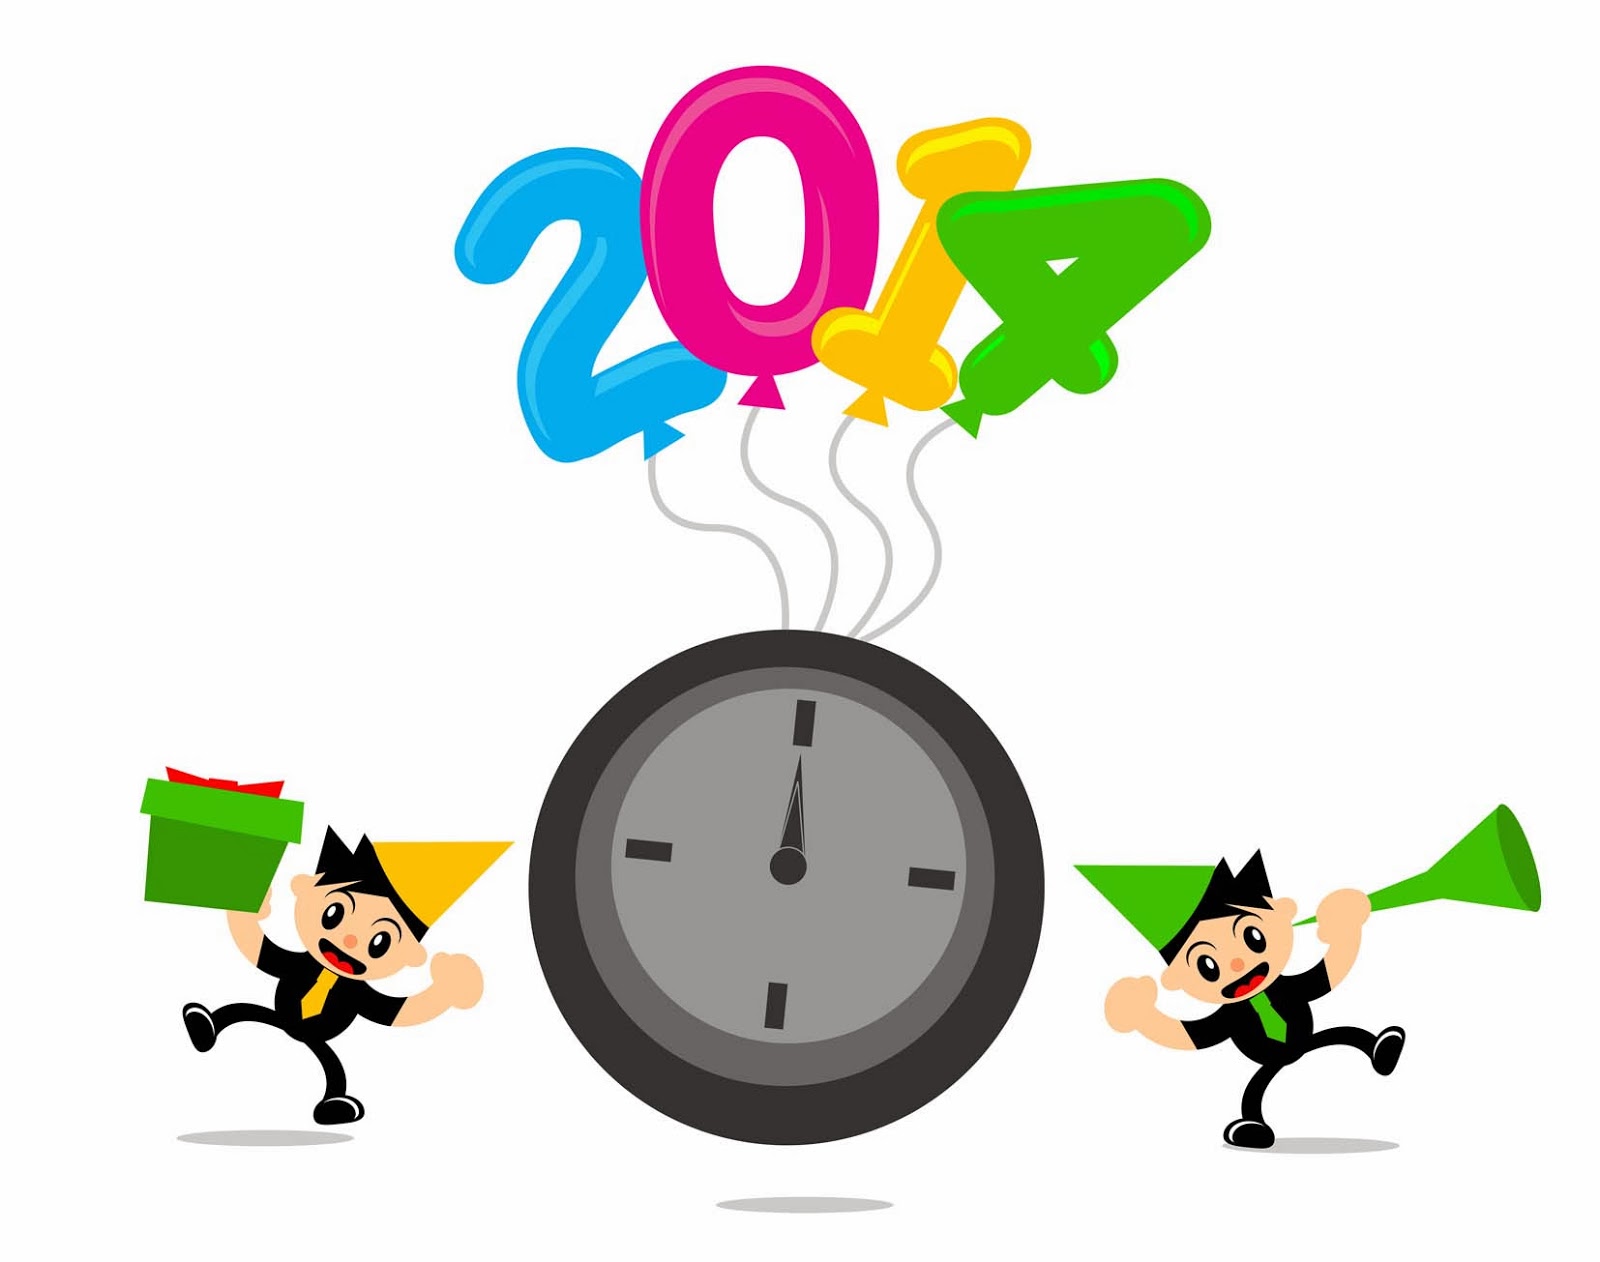 Graphic Design Reference: Free Vector of New Year 2014 Themes ...